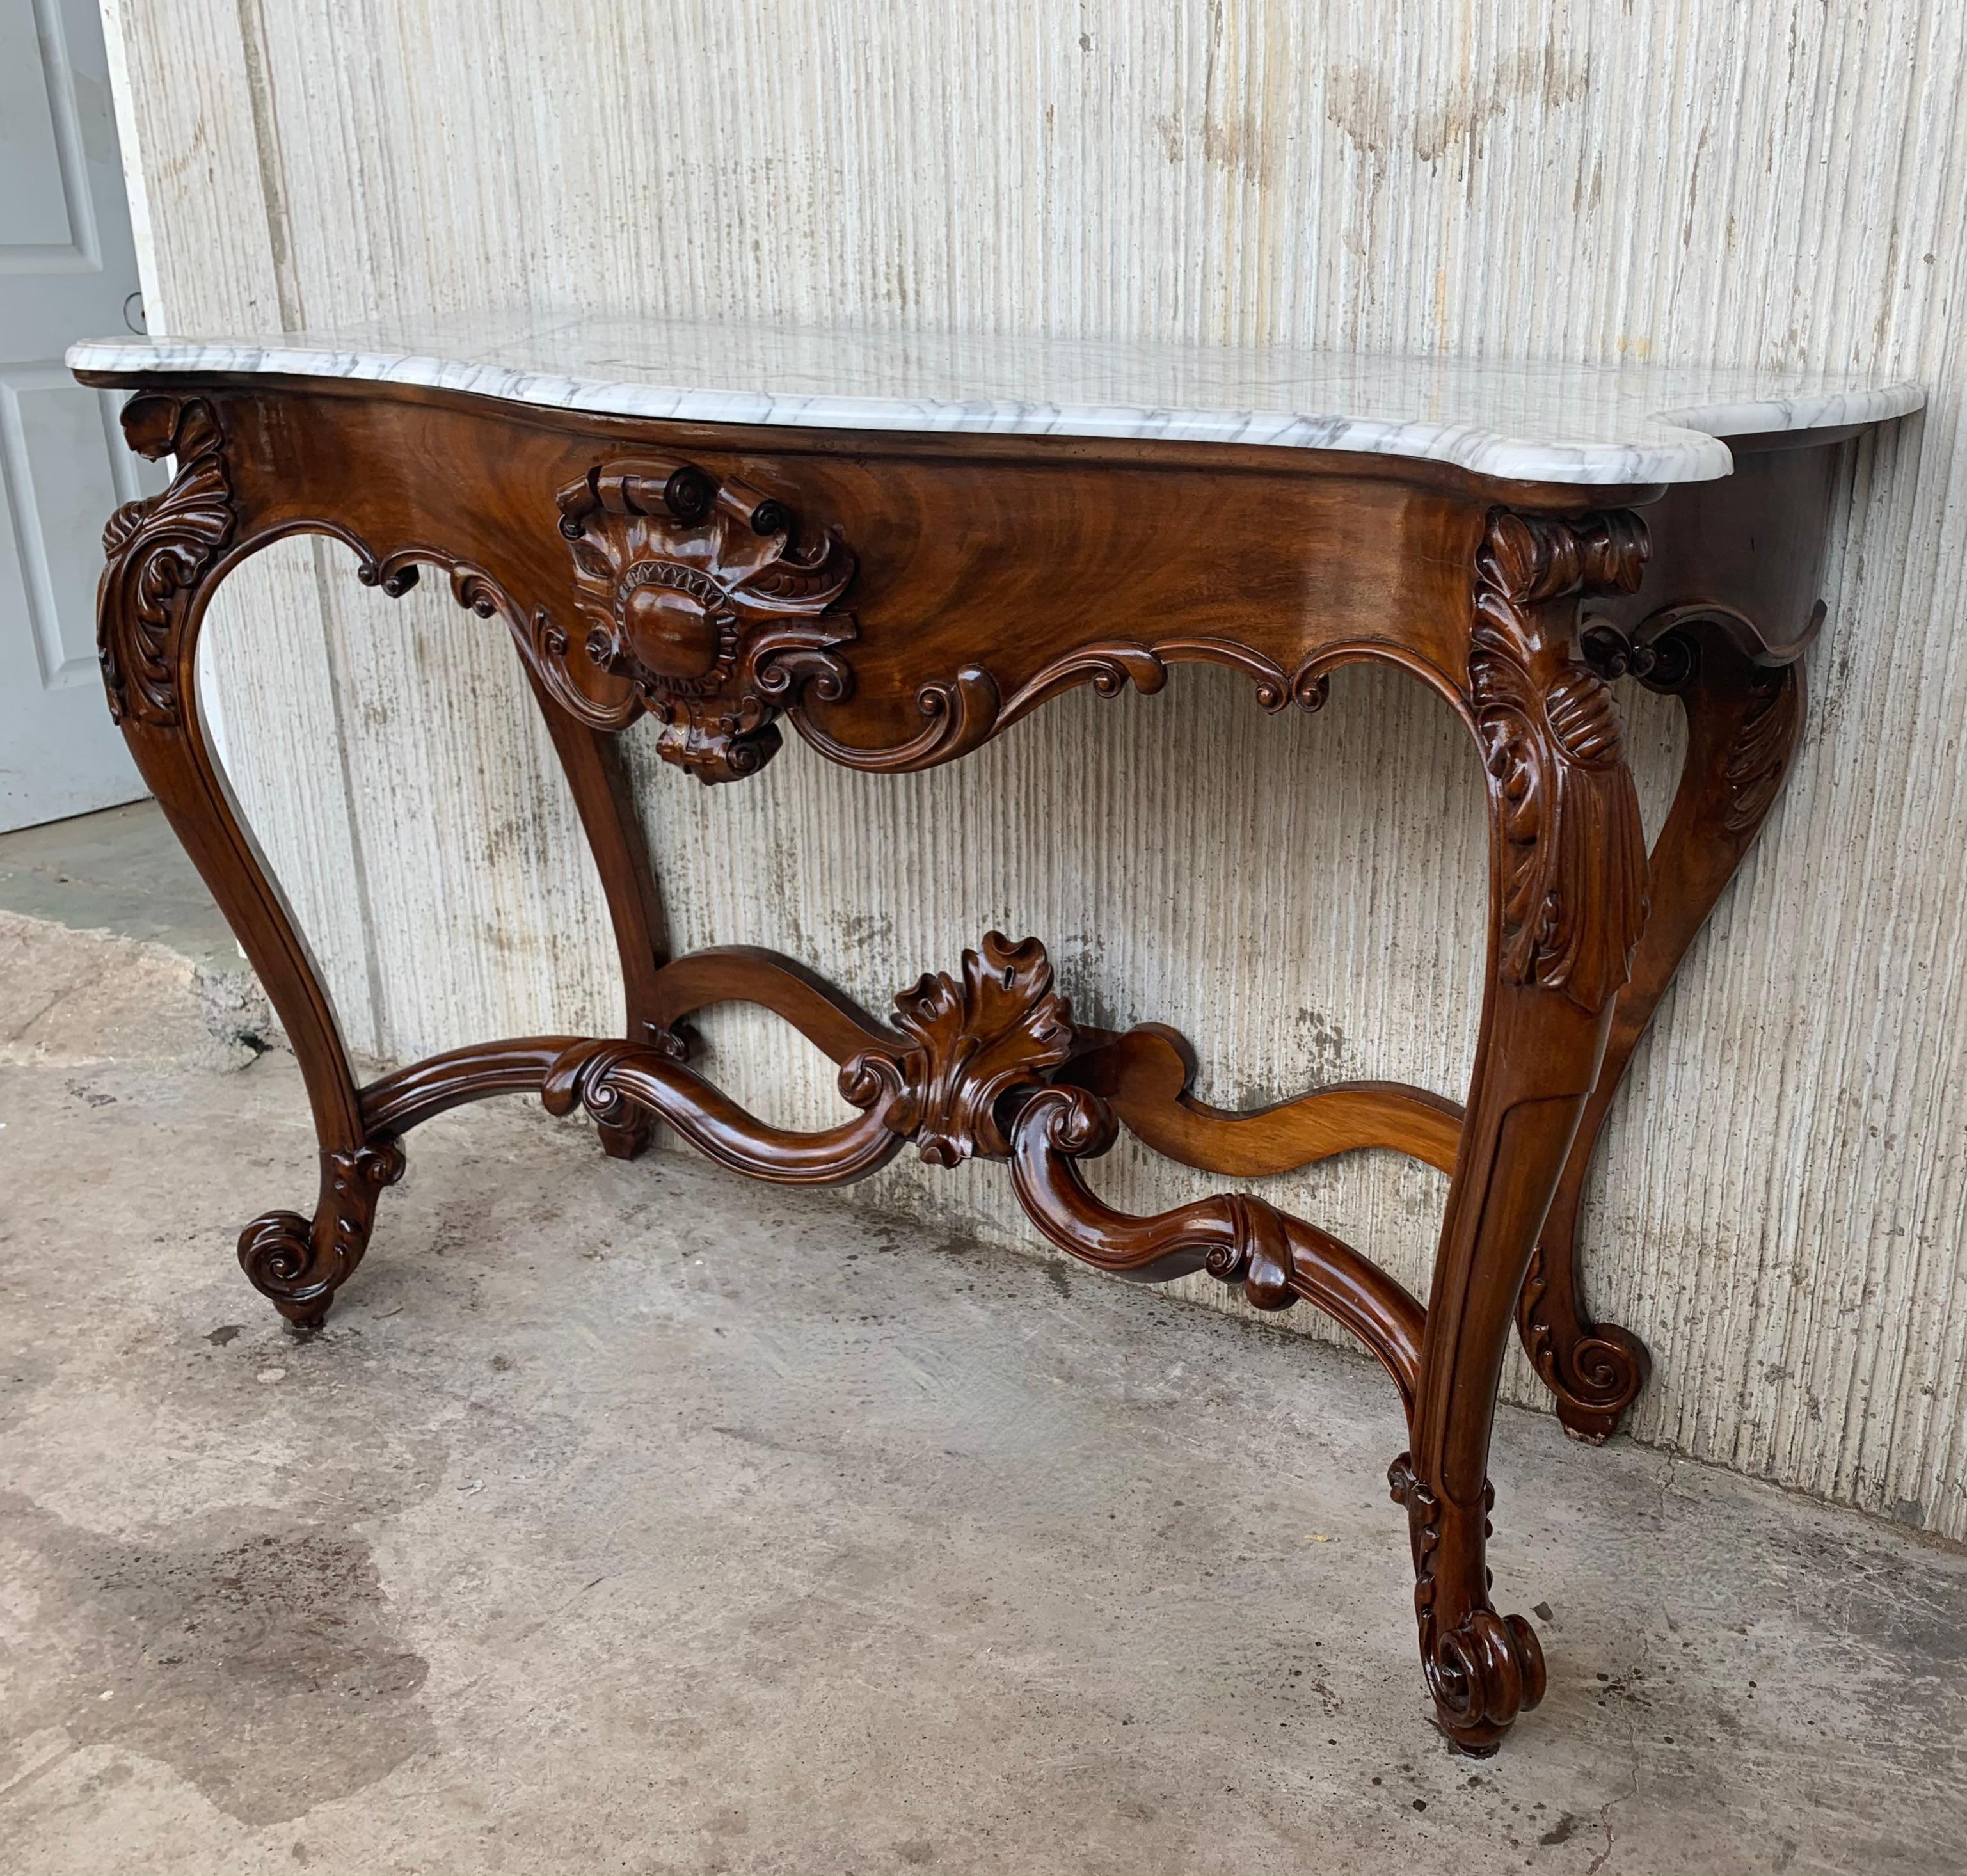 Large French Regency Carved Walnut Console Table with White Marble Top '2 Avai' For Sale 1